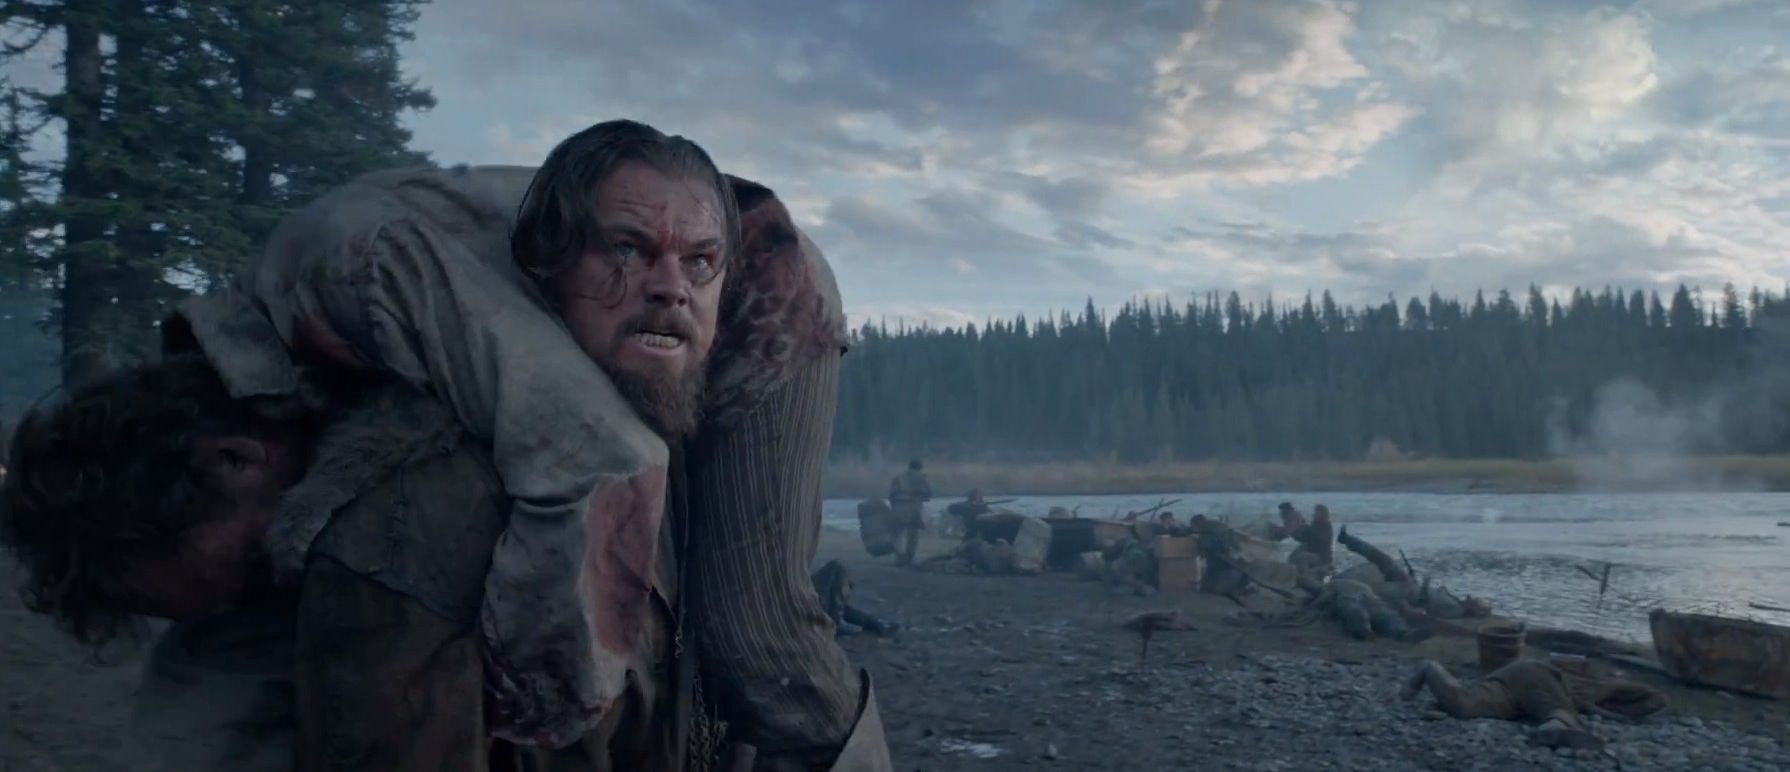 Leonardo DiCaprio carries a man on his back in &#039;The Revenant